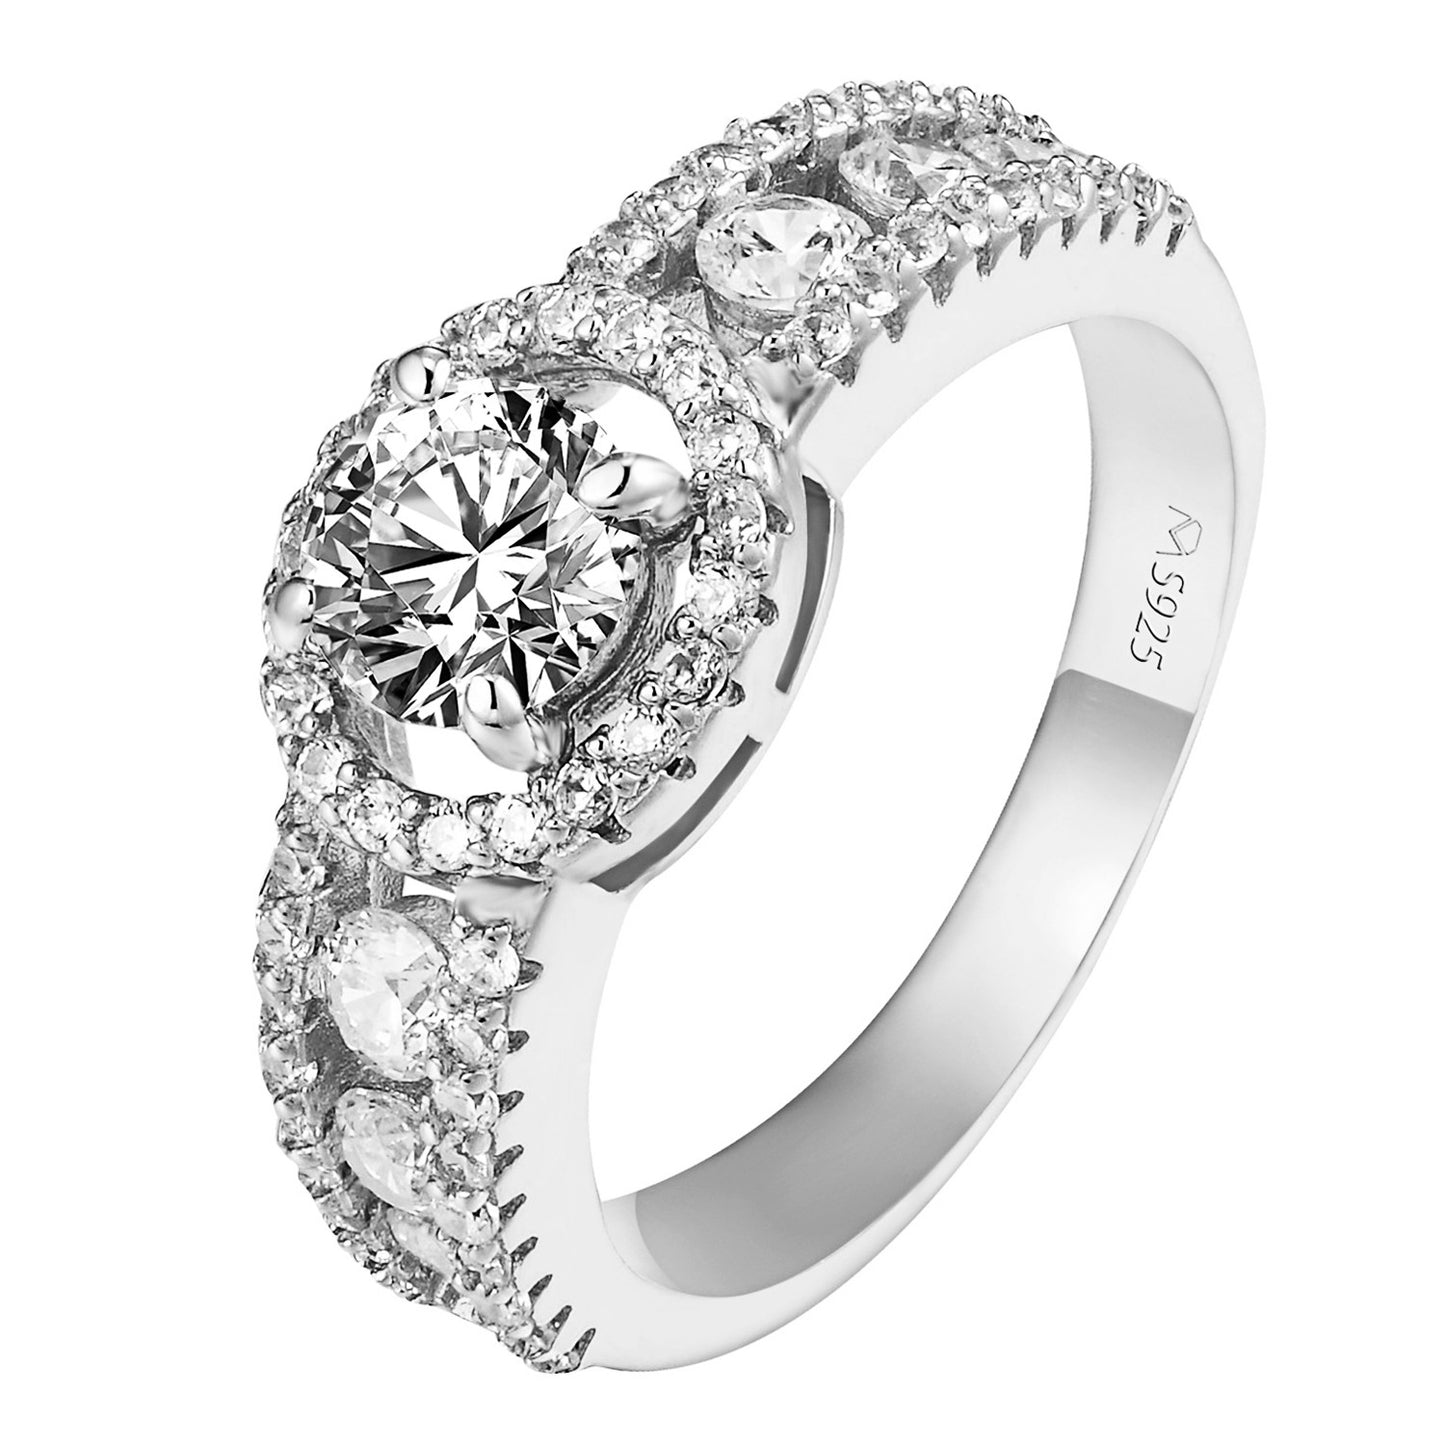 Solitaire Halo Engagement Ring Round Cut Cubic Zircon Sterling 925 Silver Bridal